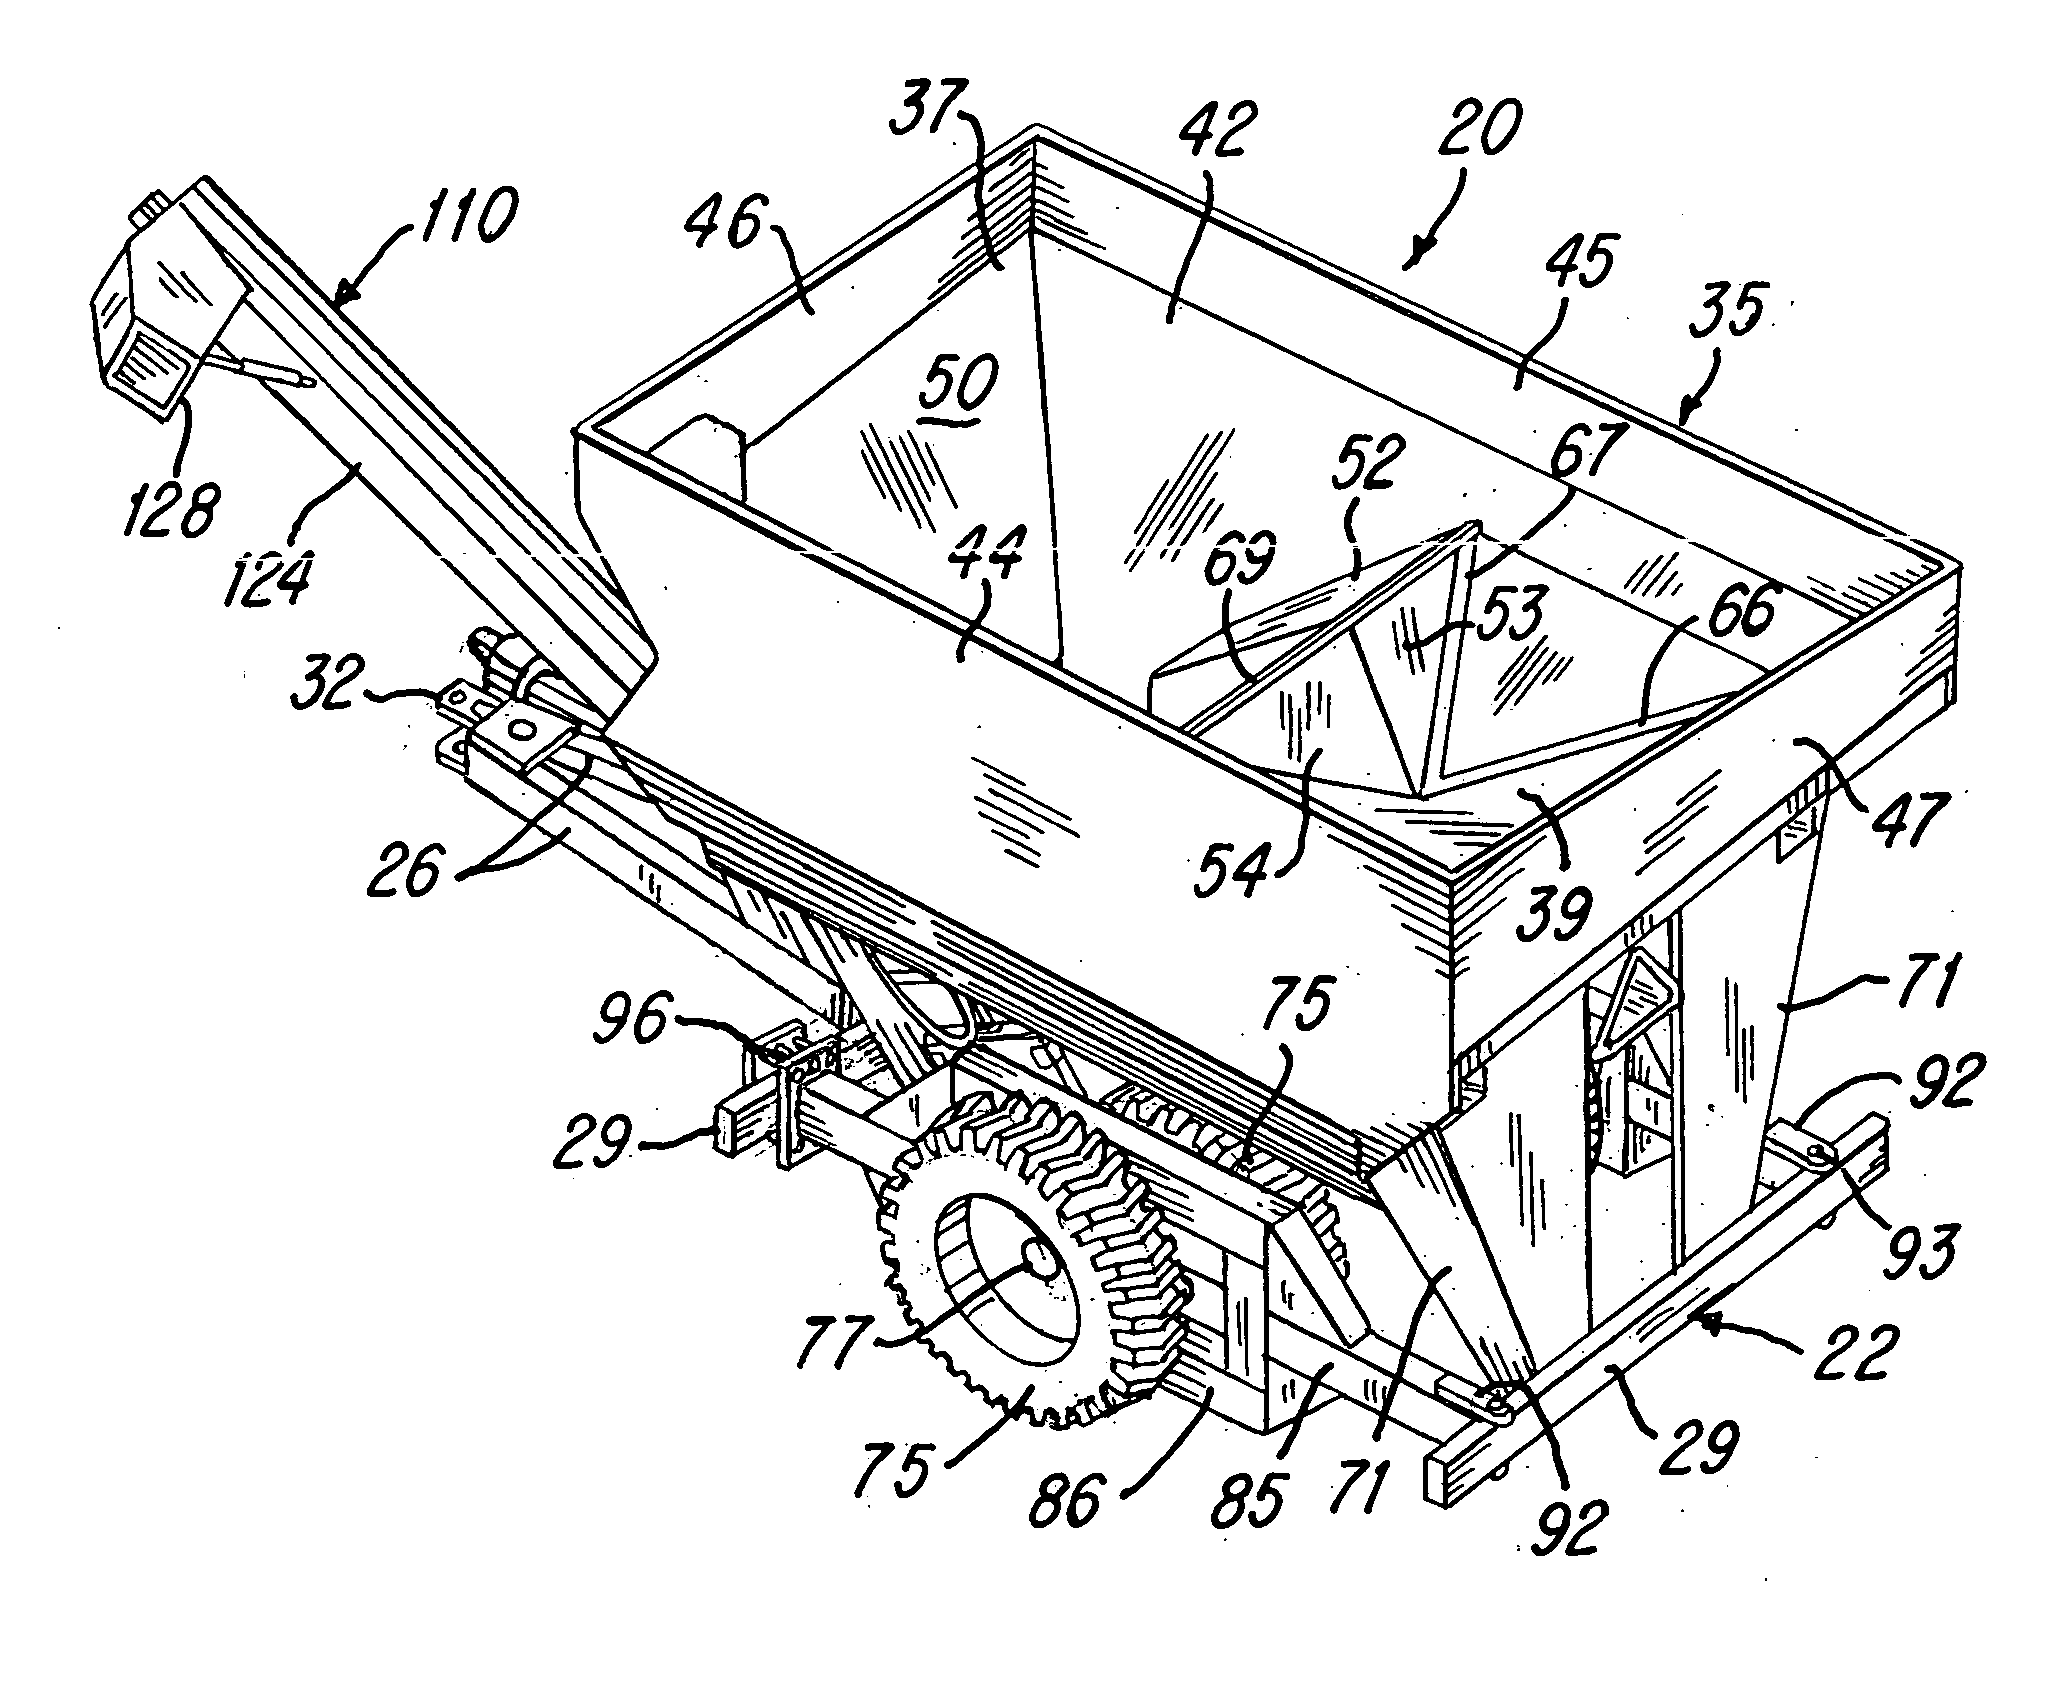 Grain wagon with improved grain container